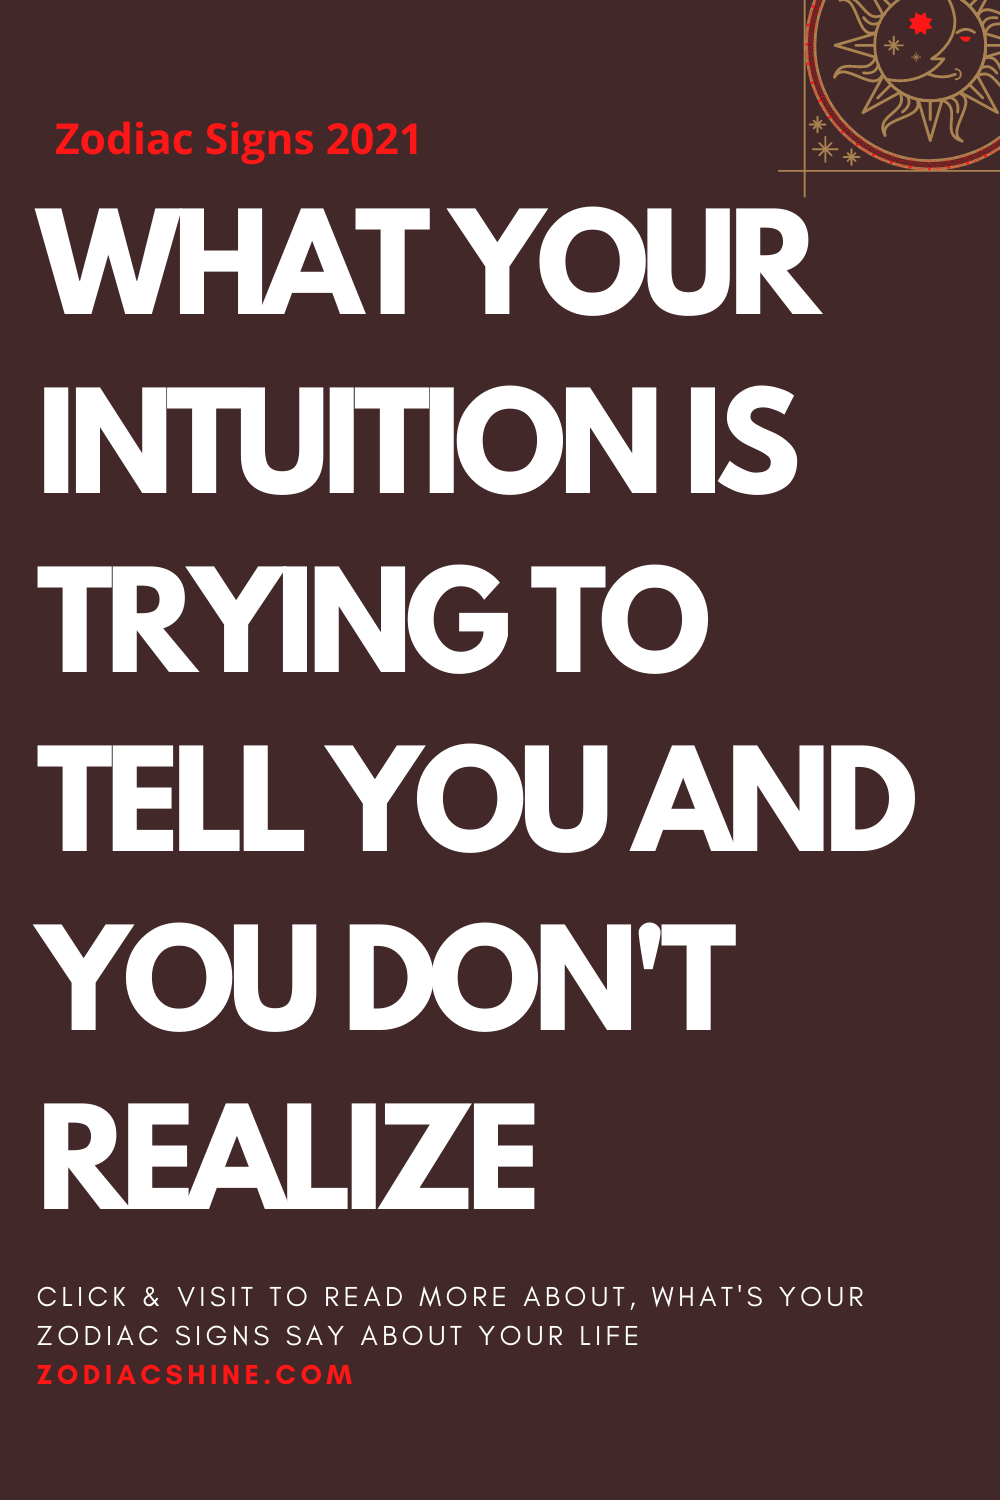 WHAT YOUR INTUITION IS TRYING TO TELL YOU AND YOU DON'T REALIZE